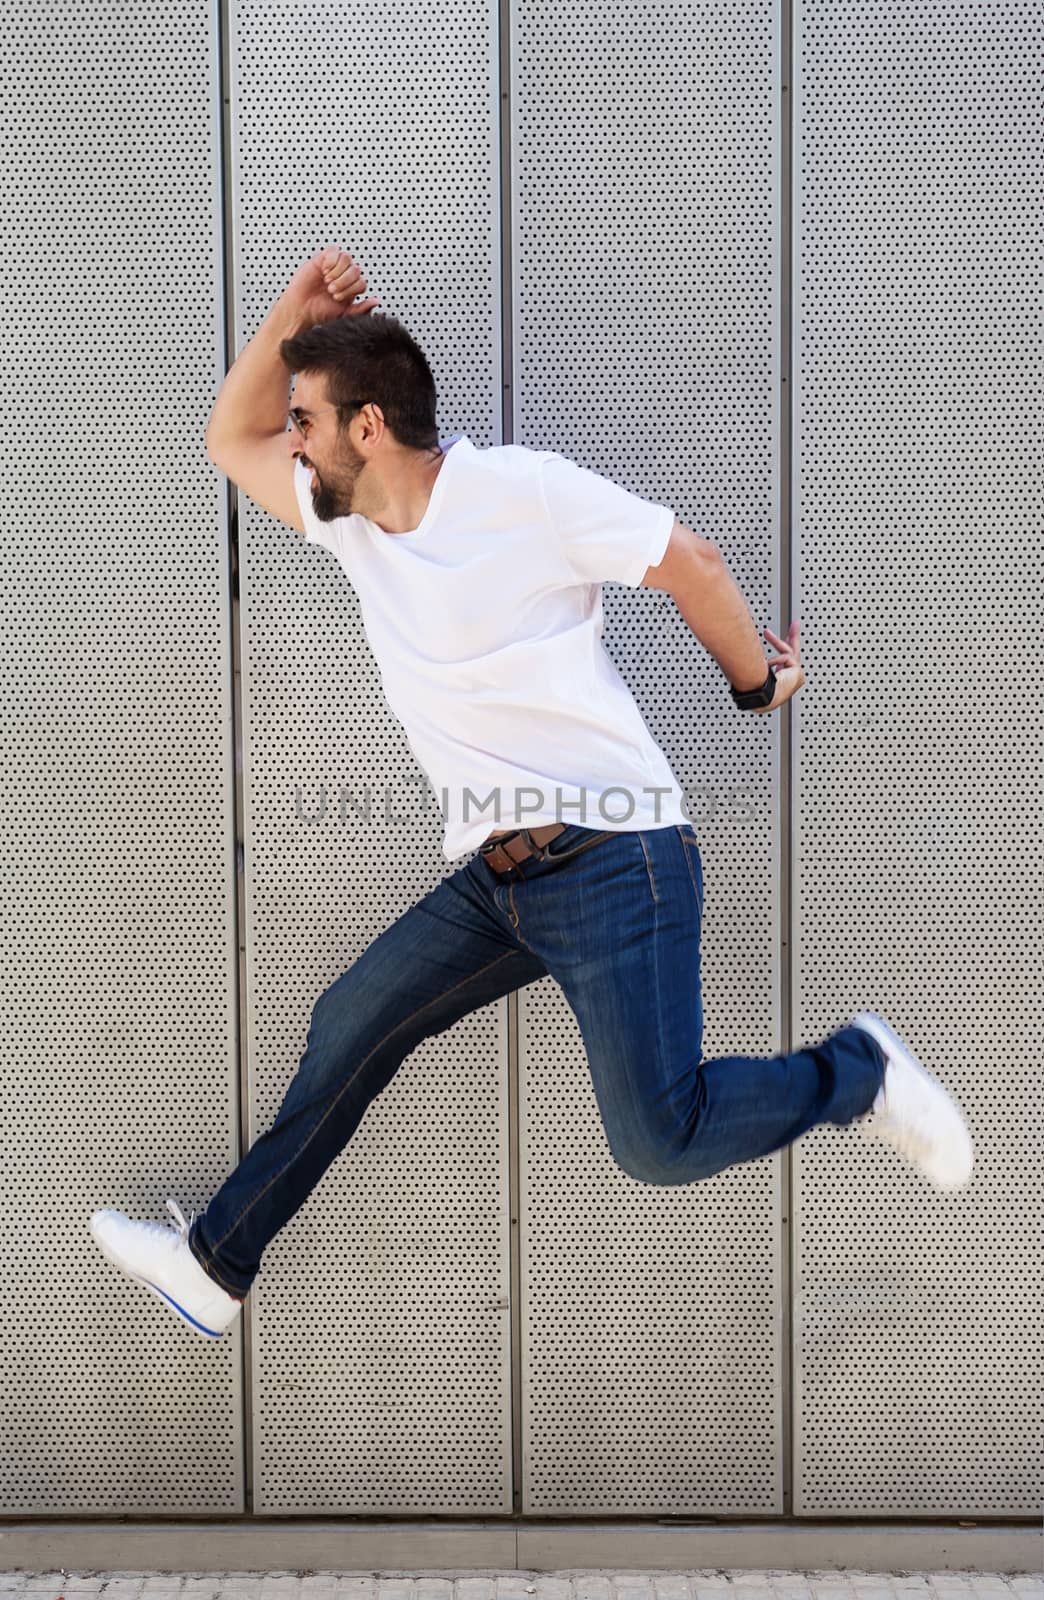 Bearded guy with sunglasses jumping against metallic wall